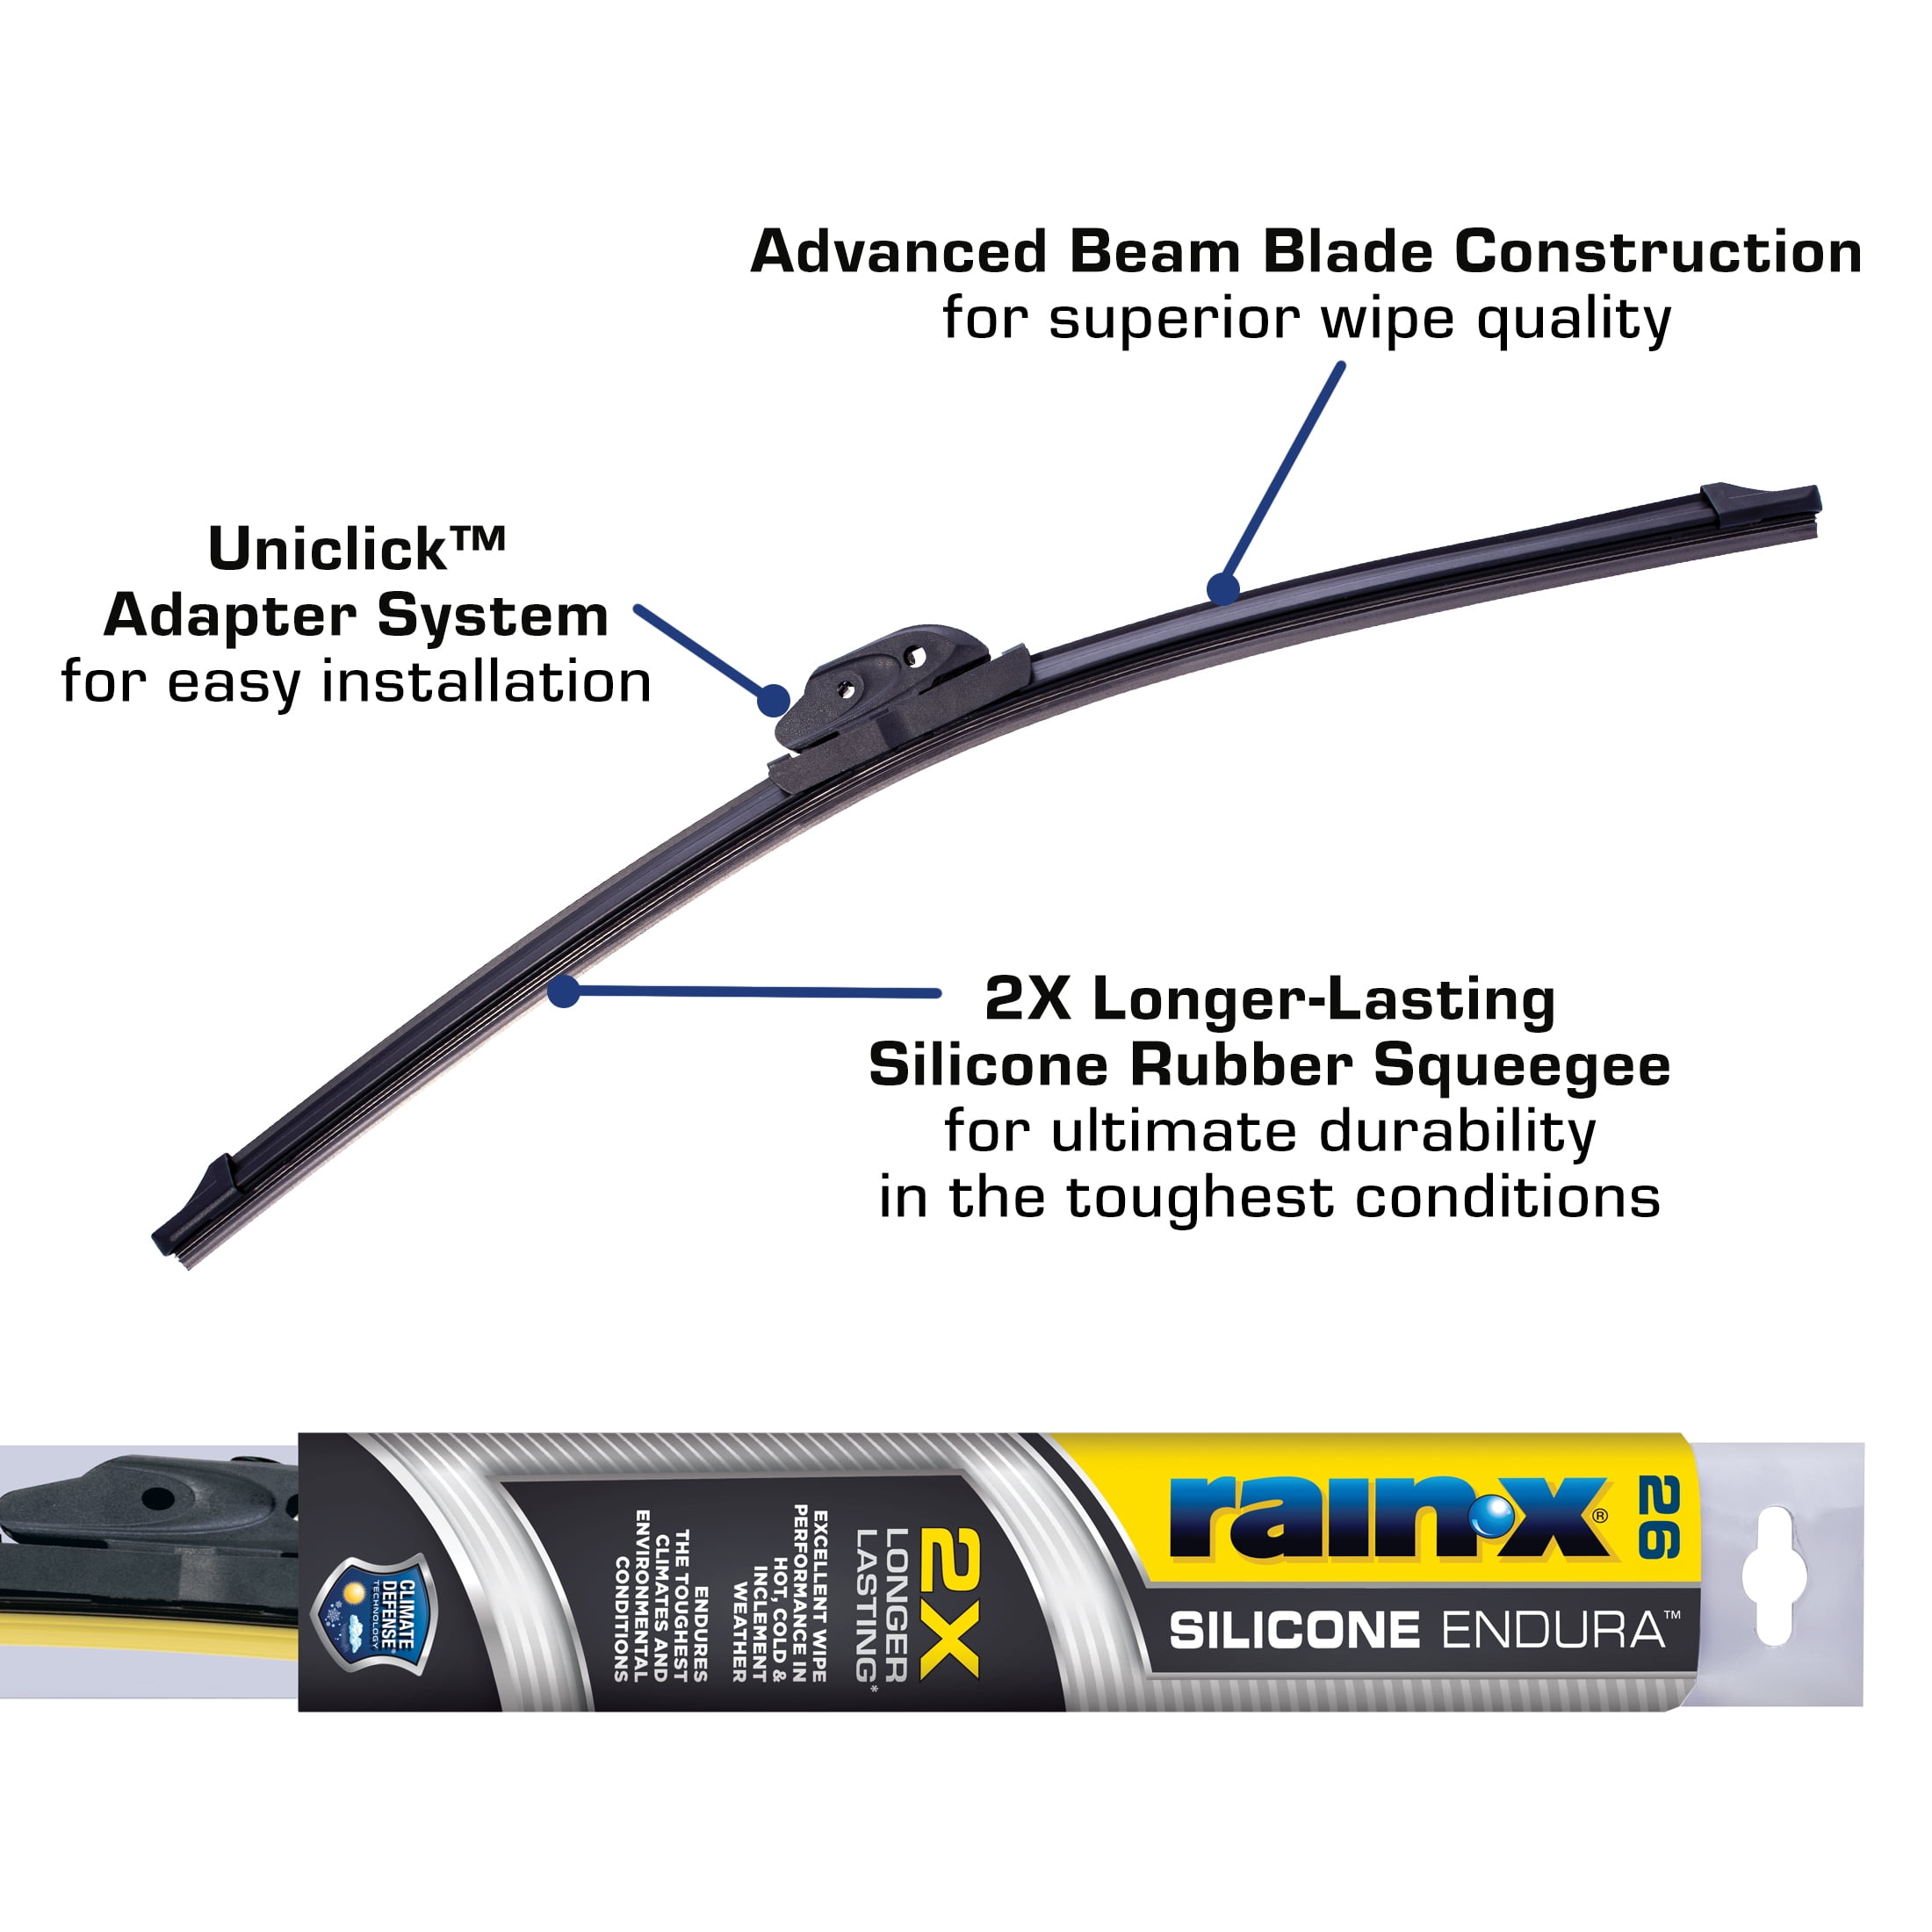 Wiper blade recommendations